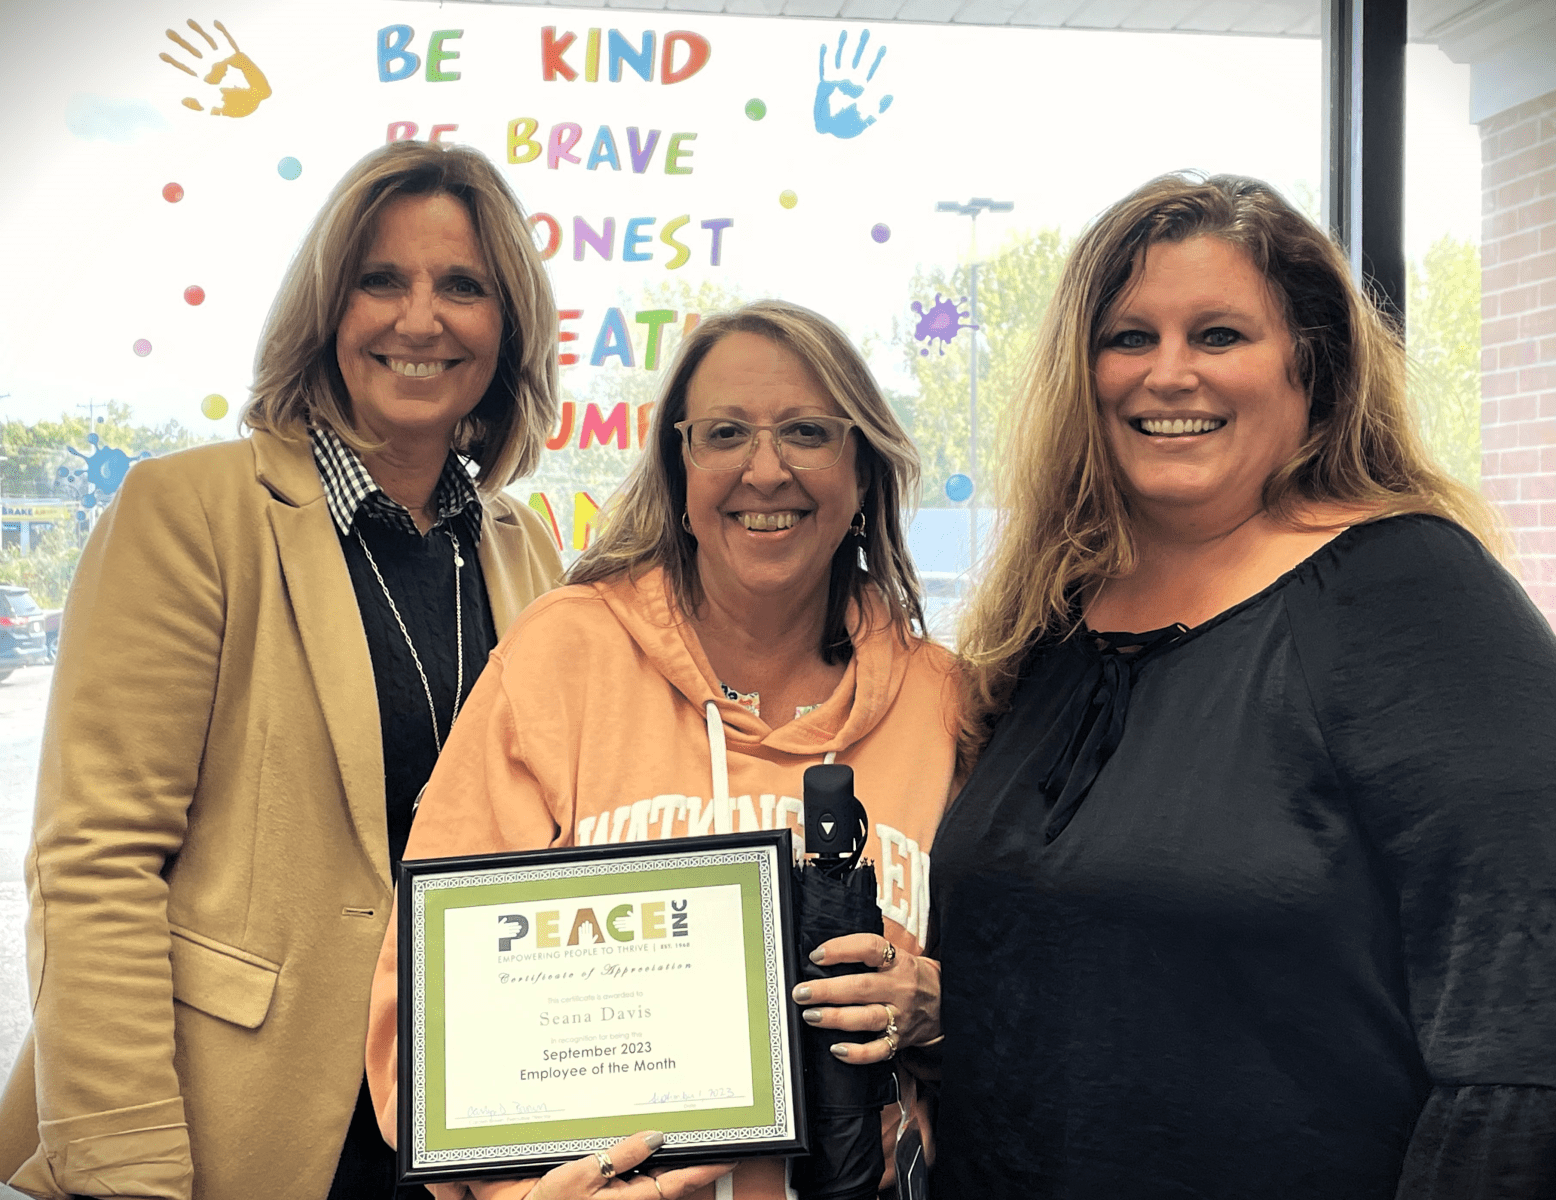 Employee of the Month Seana Davis (center), with Executive Director Carolyn Brown (L) and Liverpool Site Supervisor Kelly Jensen (R).